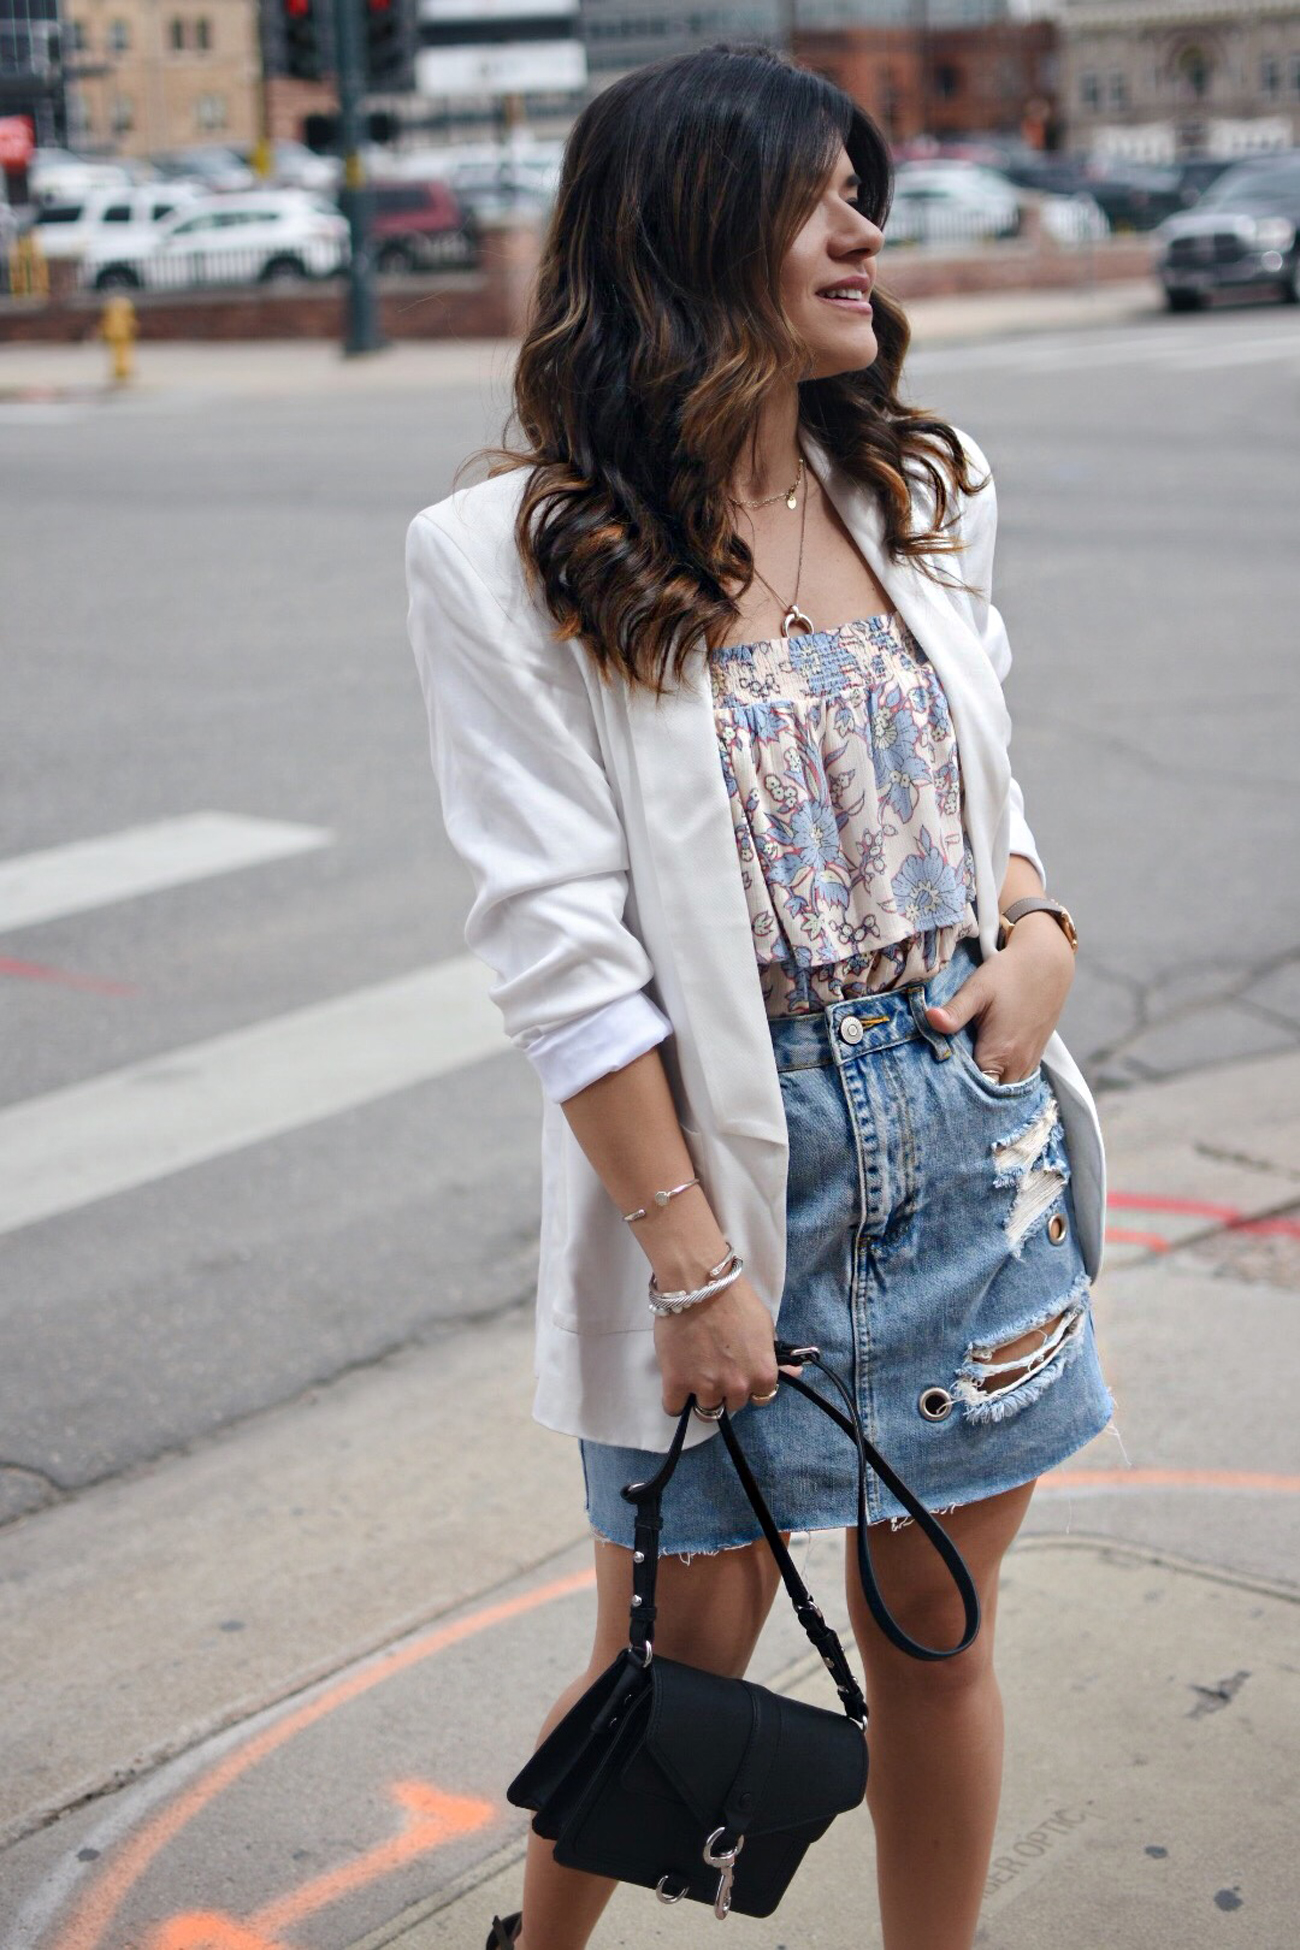 Carolina Hellal of Chic Talk wearing a Forever 21 denim mini skirt, Patterns and pops floral top, Thacker white blazer and Rebecca Minkoff black bag. 